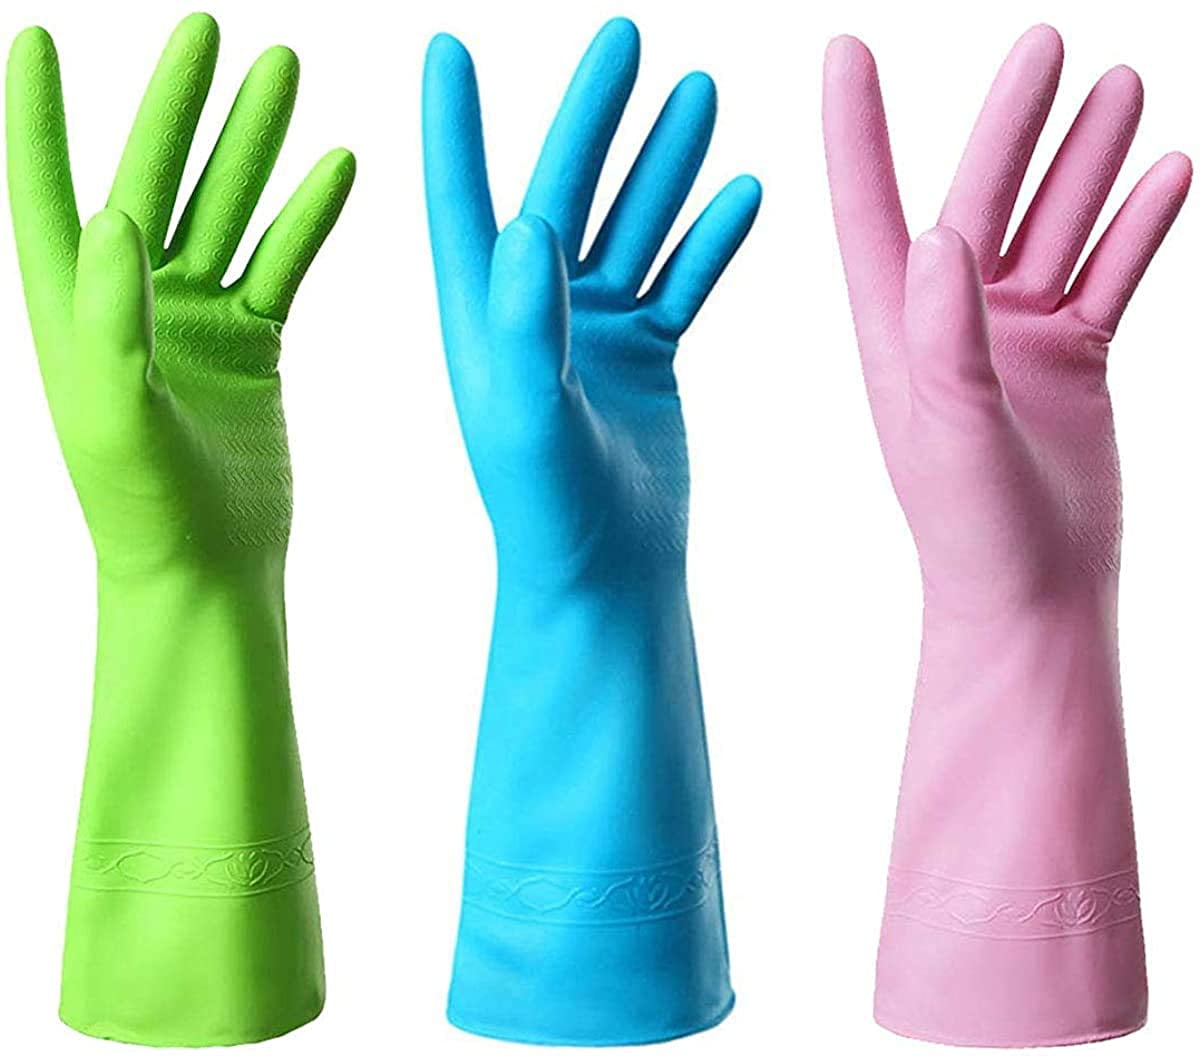 Solid Bright Colours ACMEDE 3 Pairs Waterproof Kitchen Cleaning PVC Rubber Gloves Plus Velvet for Dish Washing Laundry Cleaning 